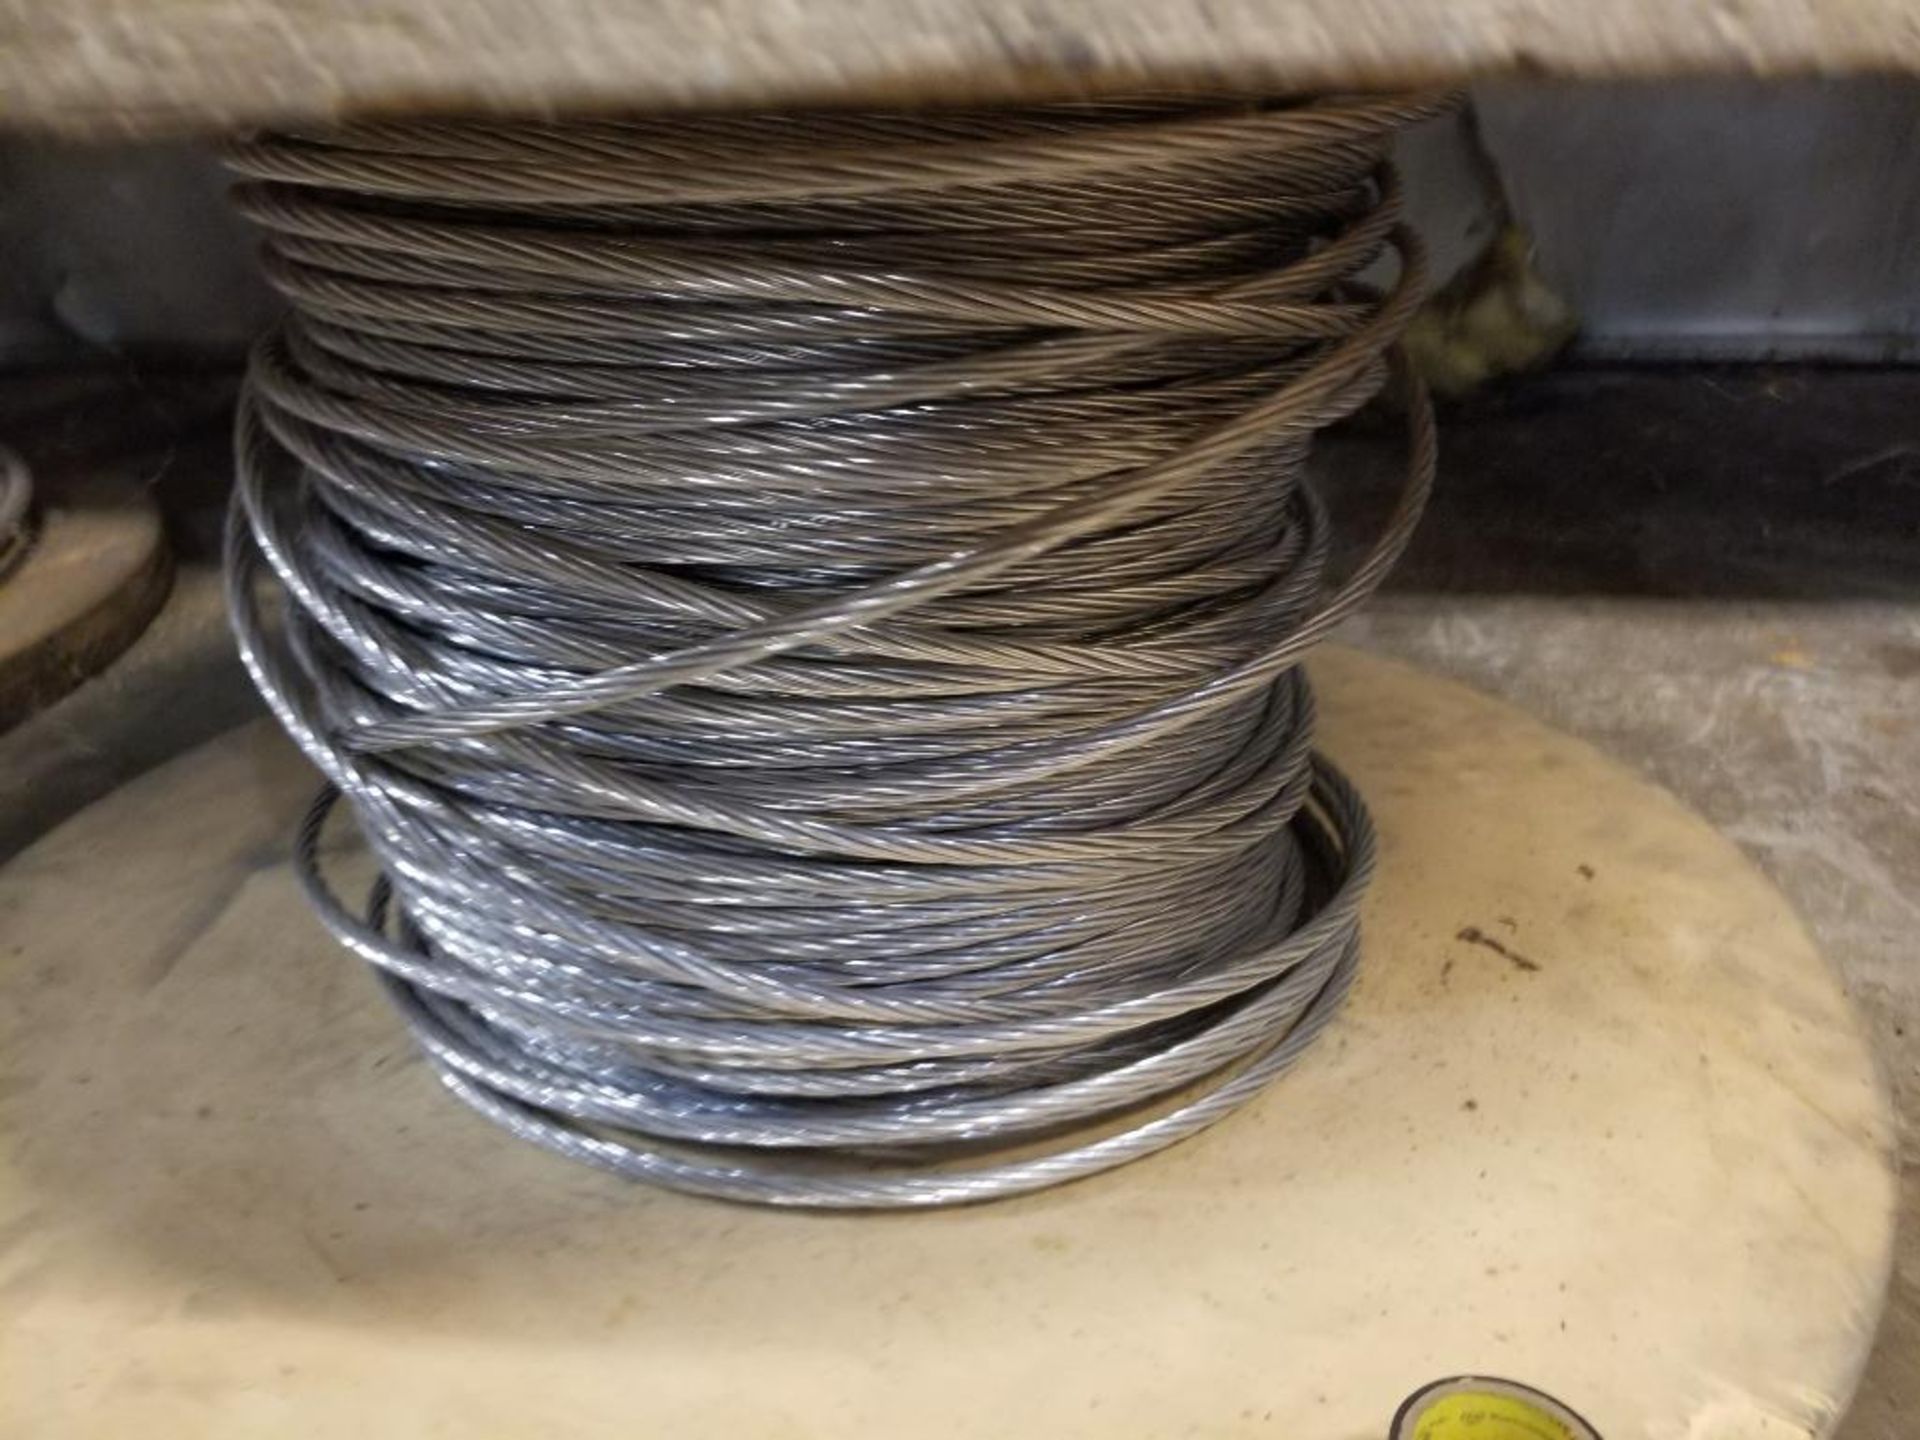 Qty 2 - Spool of bare wire. - Image 3 of 4